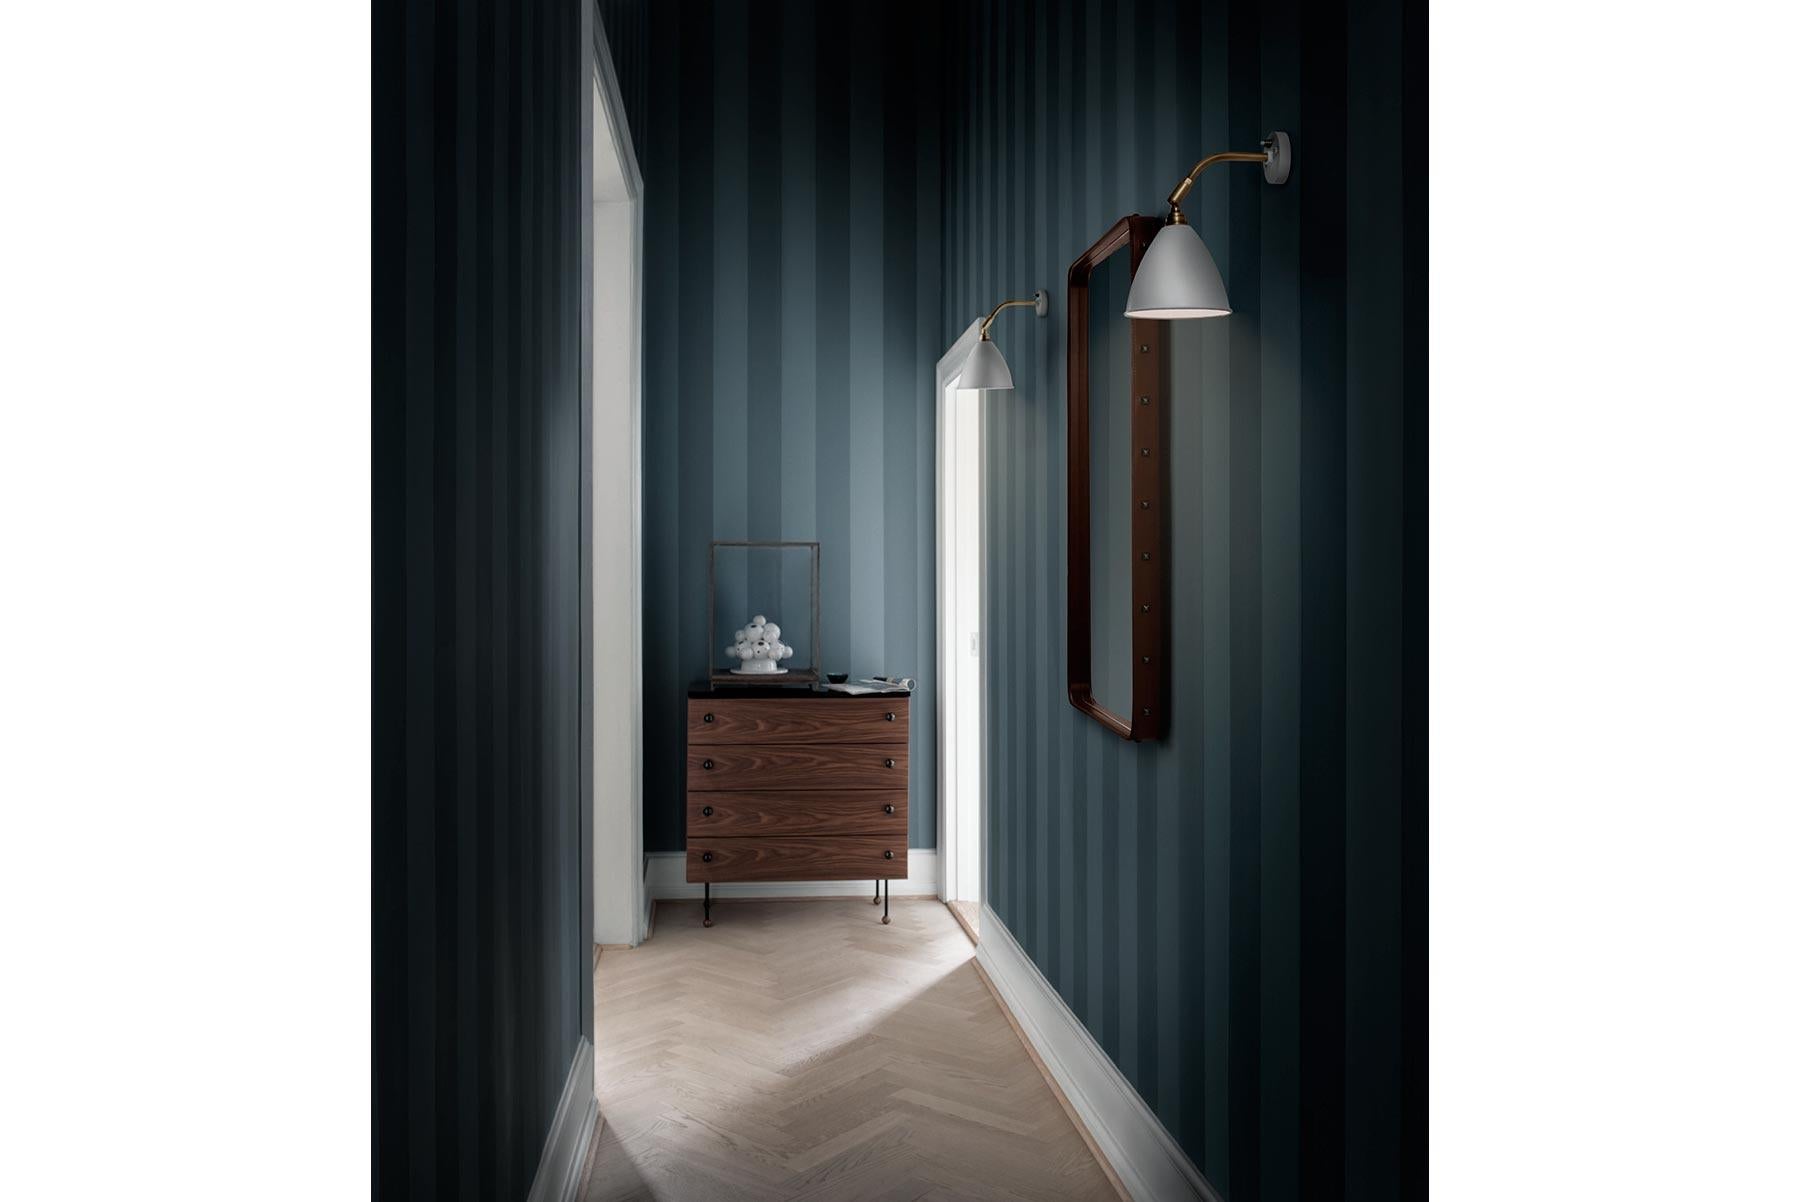 Designed by Robert Dudley Best in 1930, the Bestlite BL7 wall lamp celebrates elegant and clean lines with clear reference to the period of Bauhaus. With its contemporary look in various finishes and movable shade, the Bestlite BL7 wall lamp is